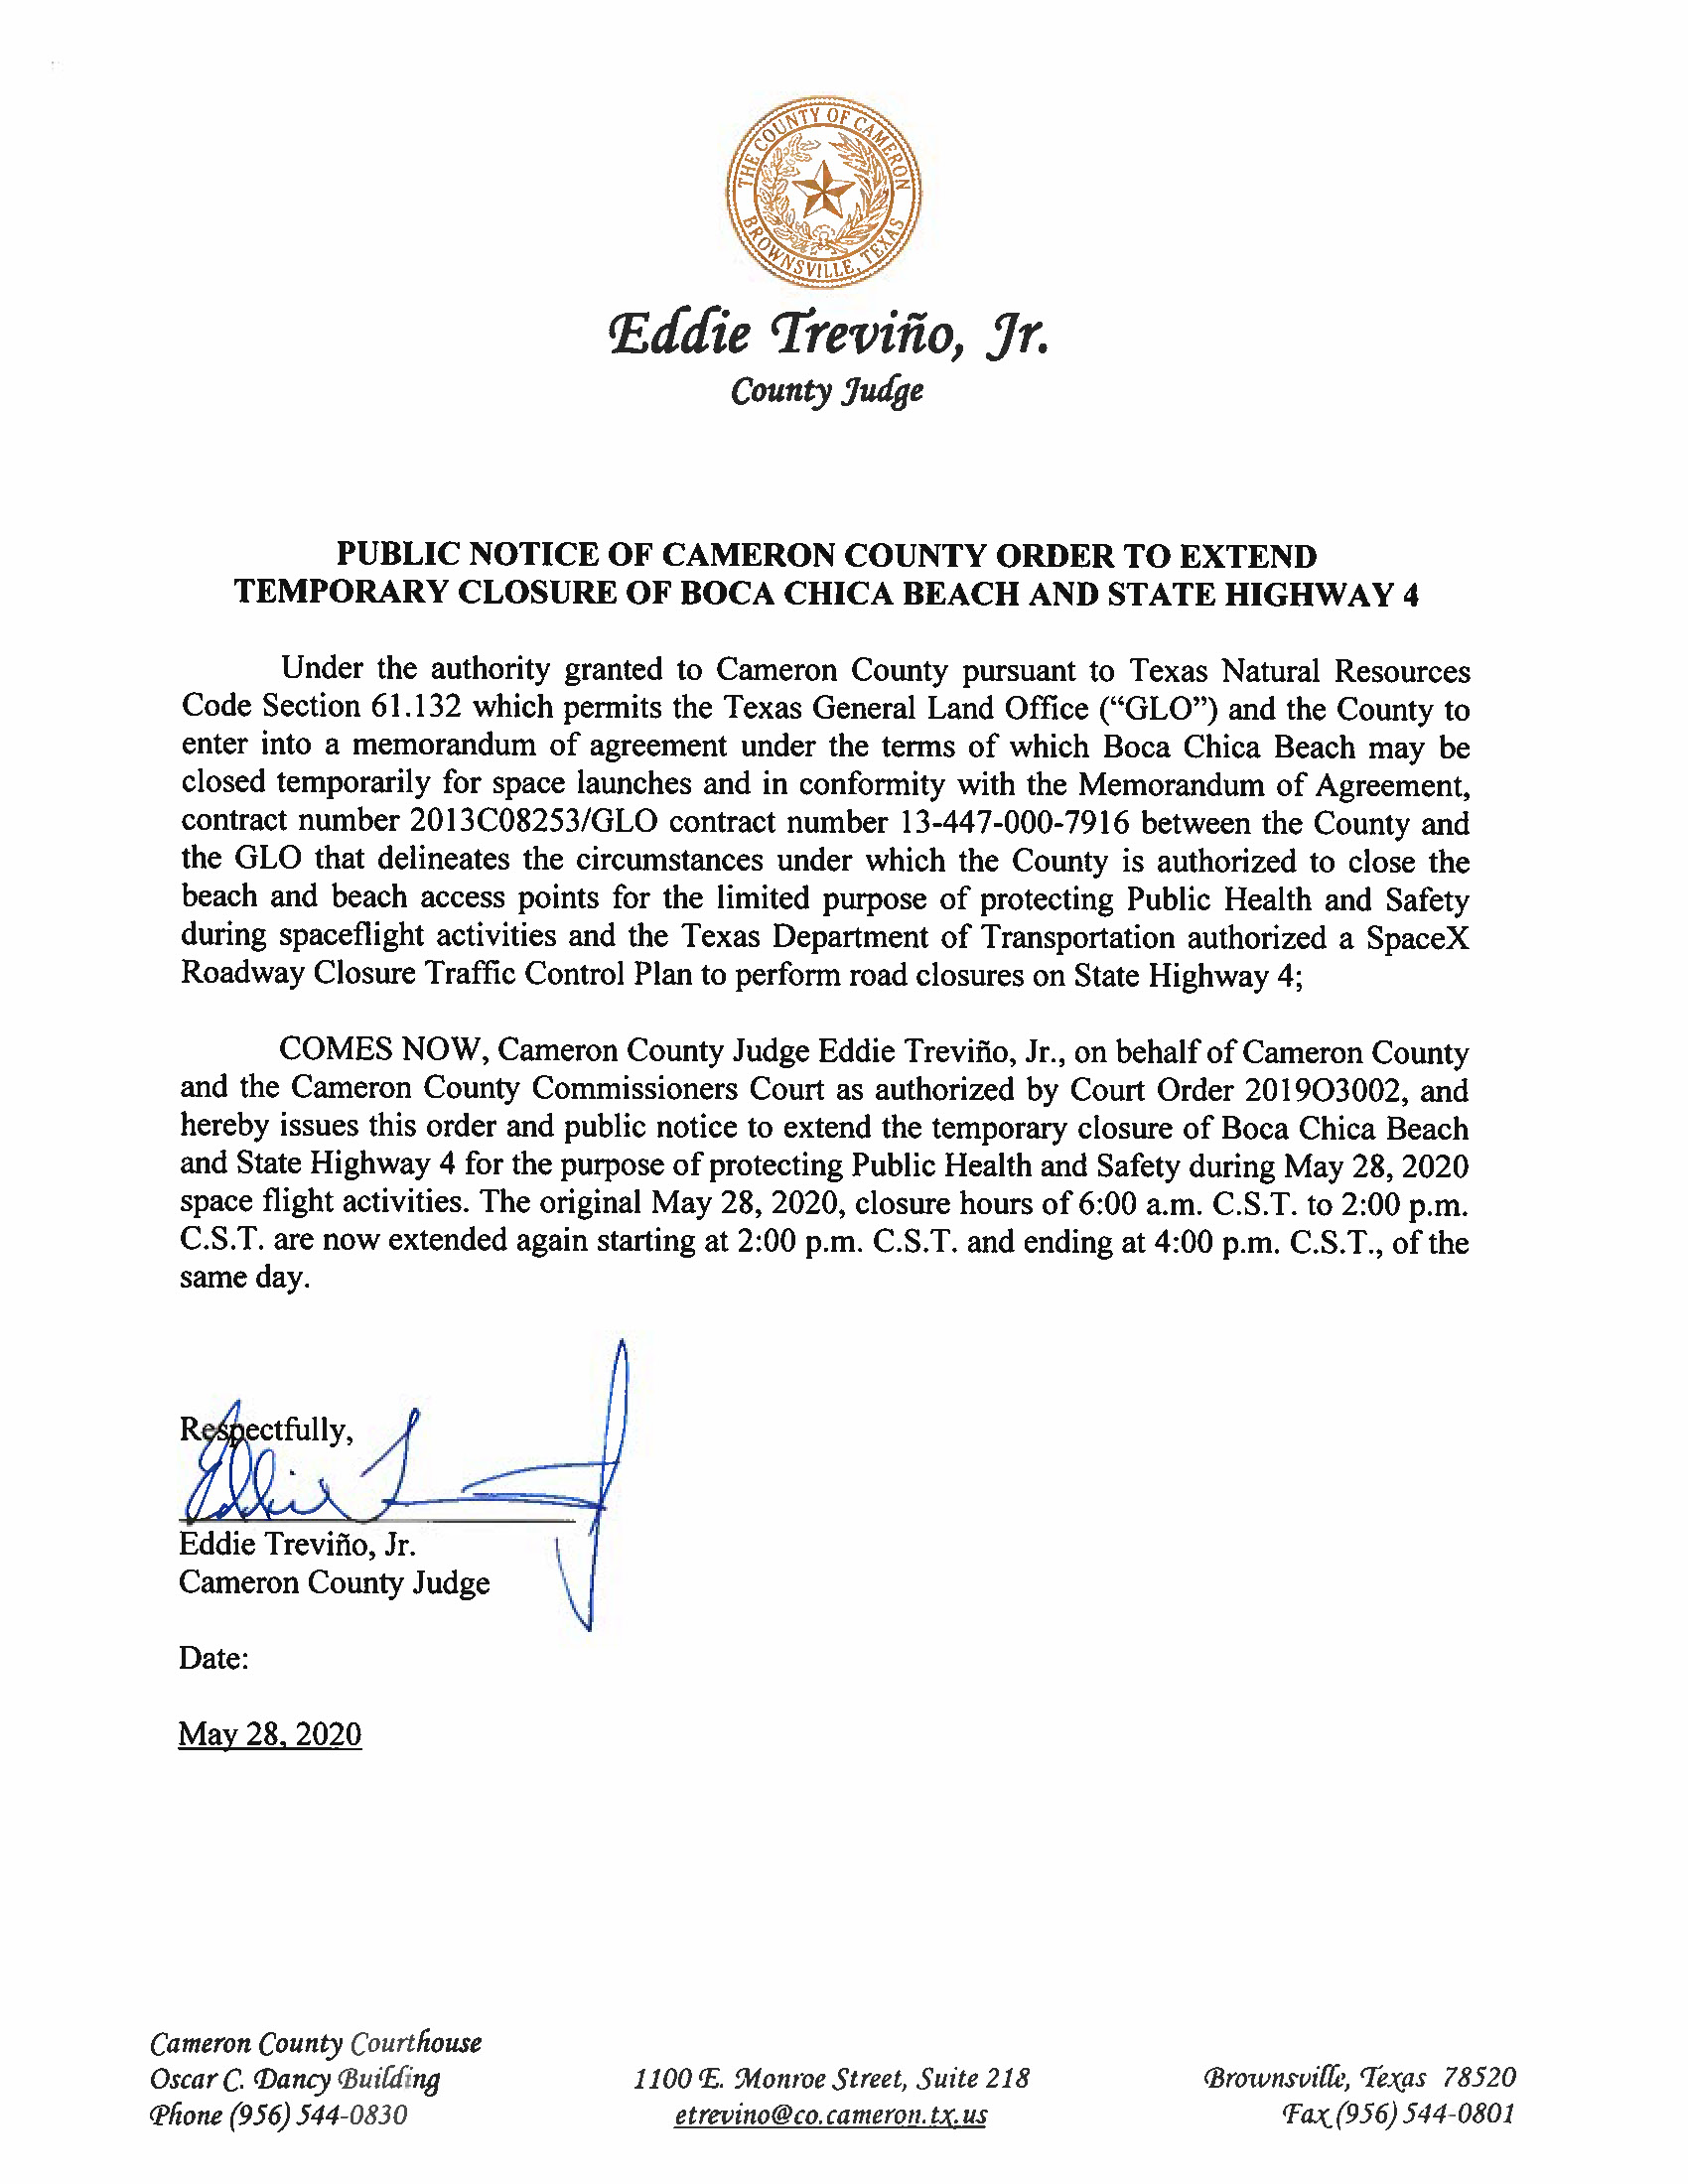 PUBLIC NOTICE OF CAMERON COUNTY ORDER TO EXTEND TEMP. BEACH CLOSURE AND HWY. 05.28.20.TIME EXTENSION TO 4PM